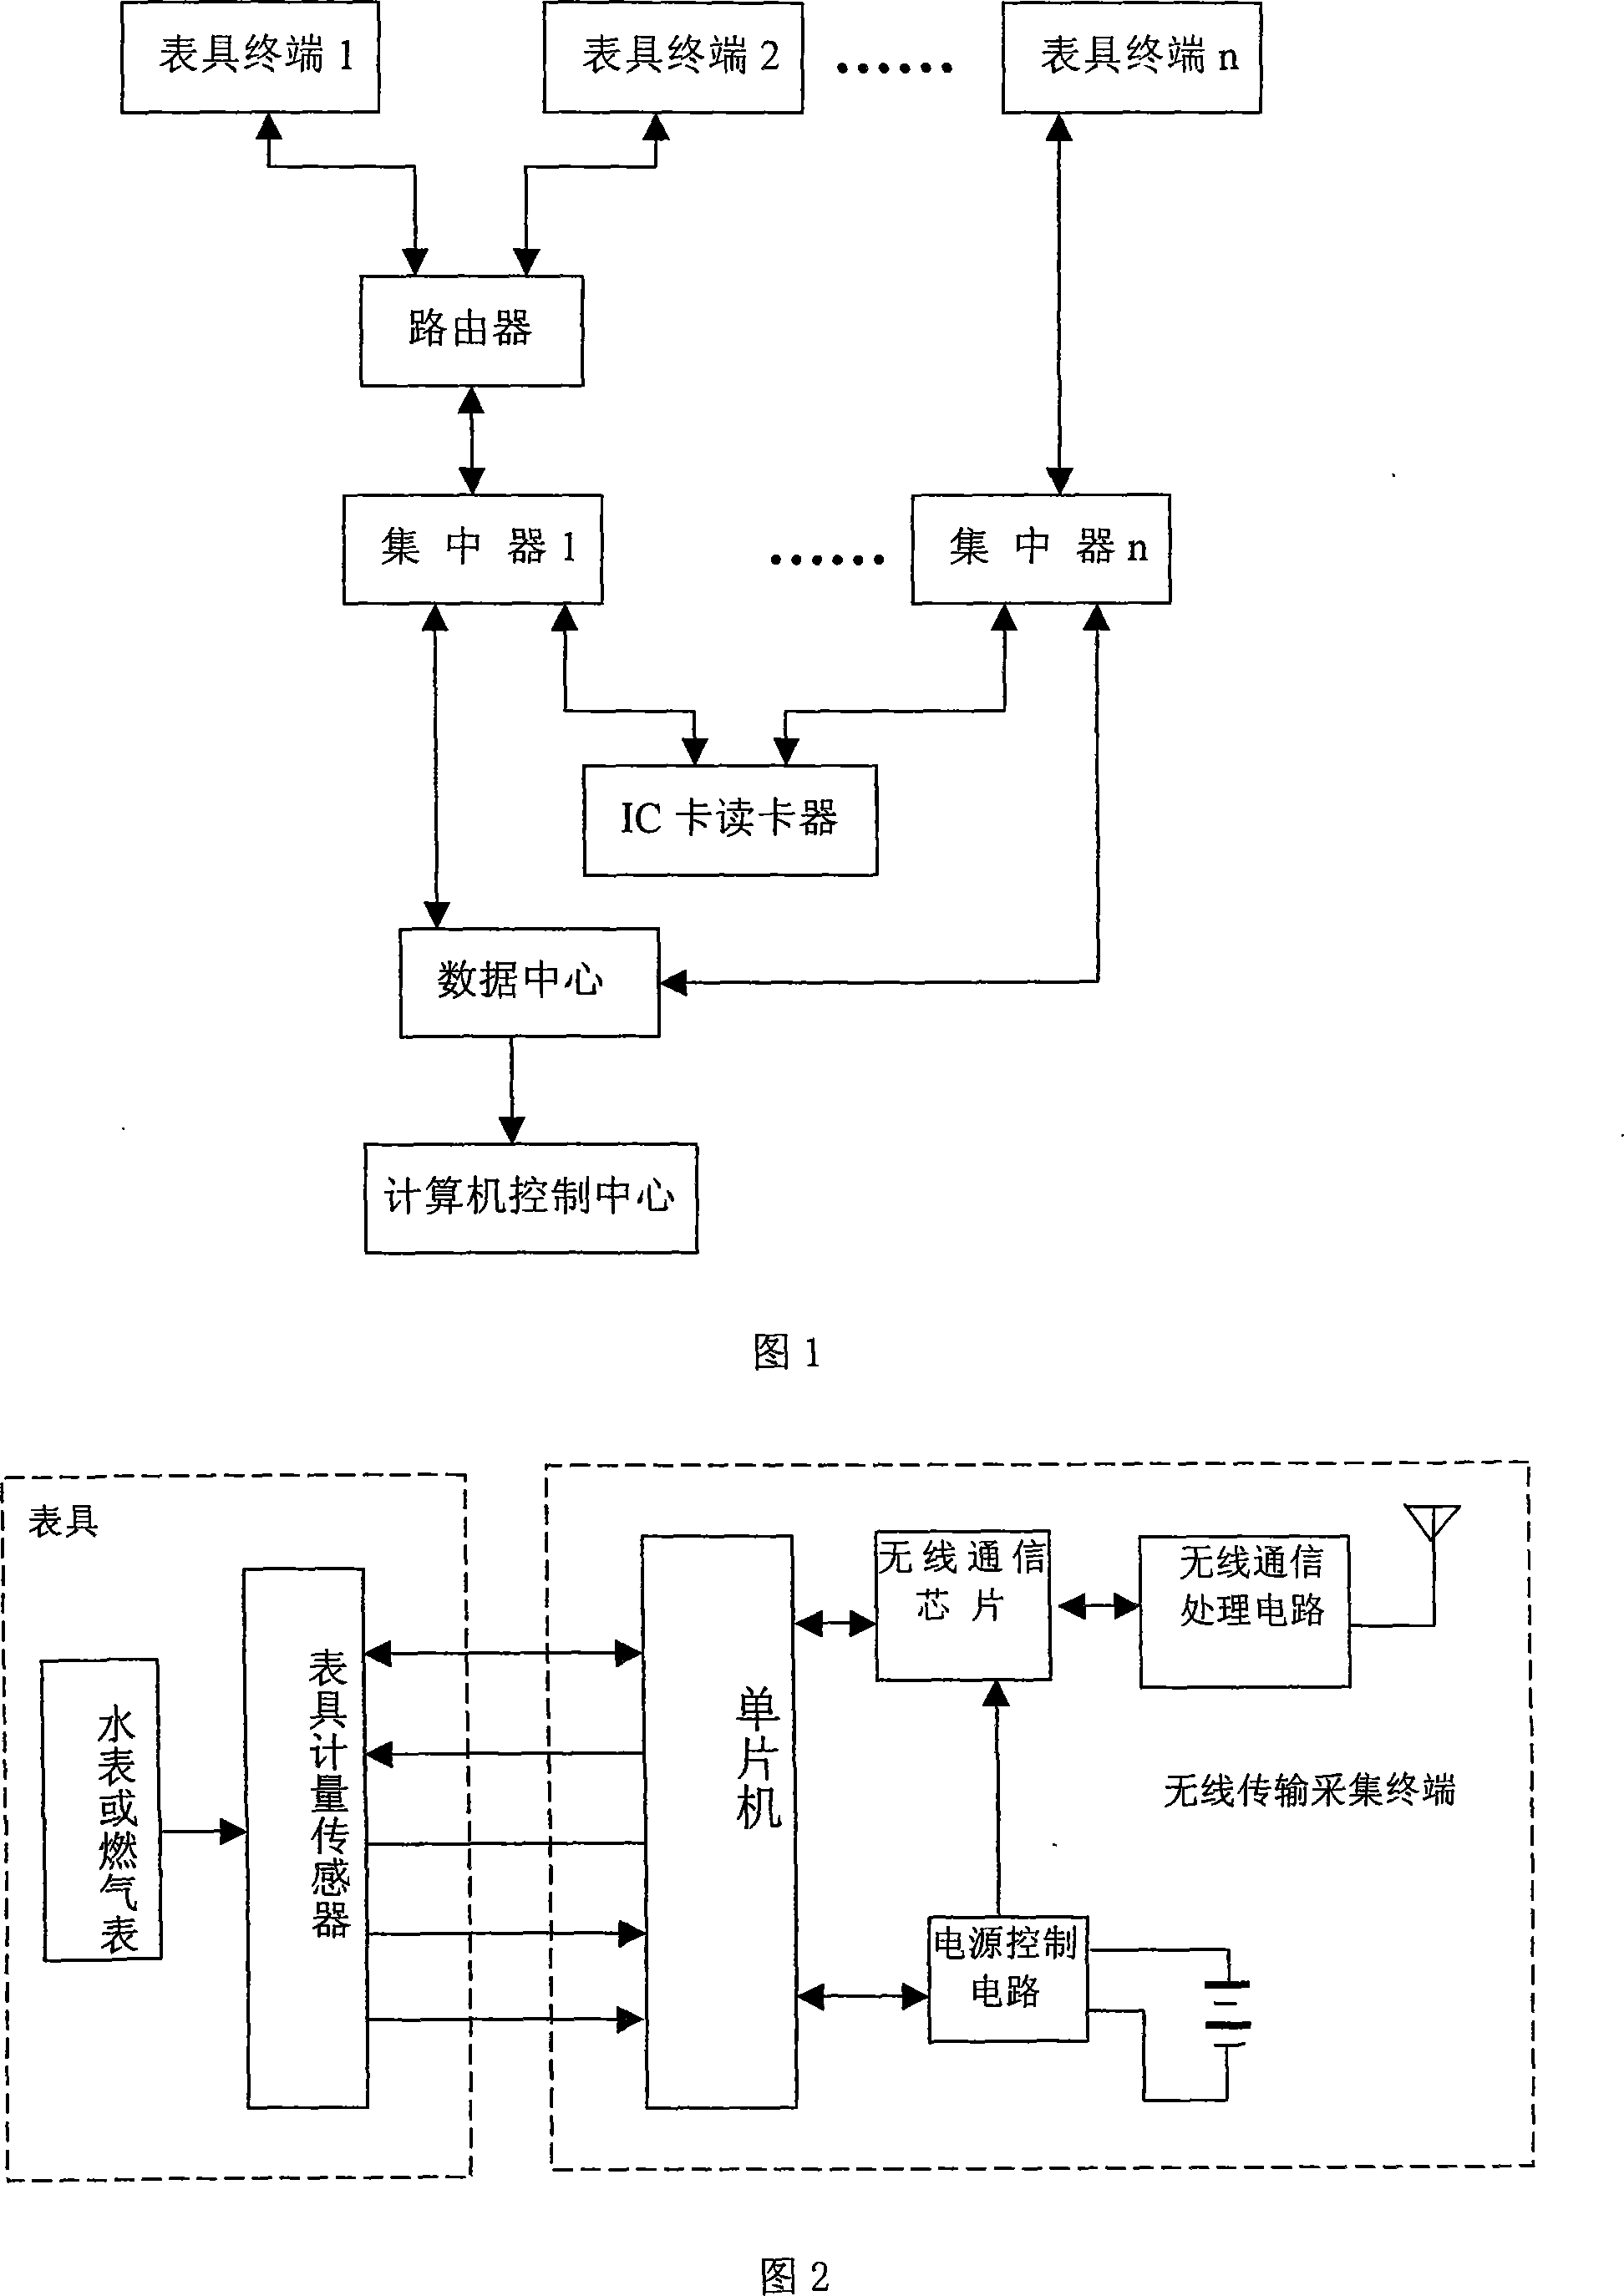 Pre-payment bidirectional real time valve controlling wireless meter reading method and system thereof